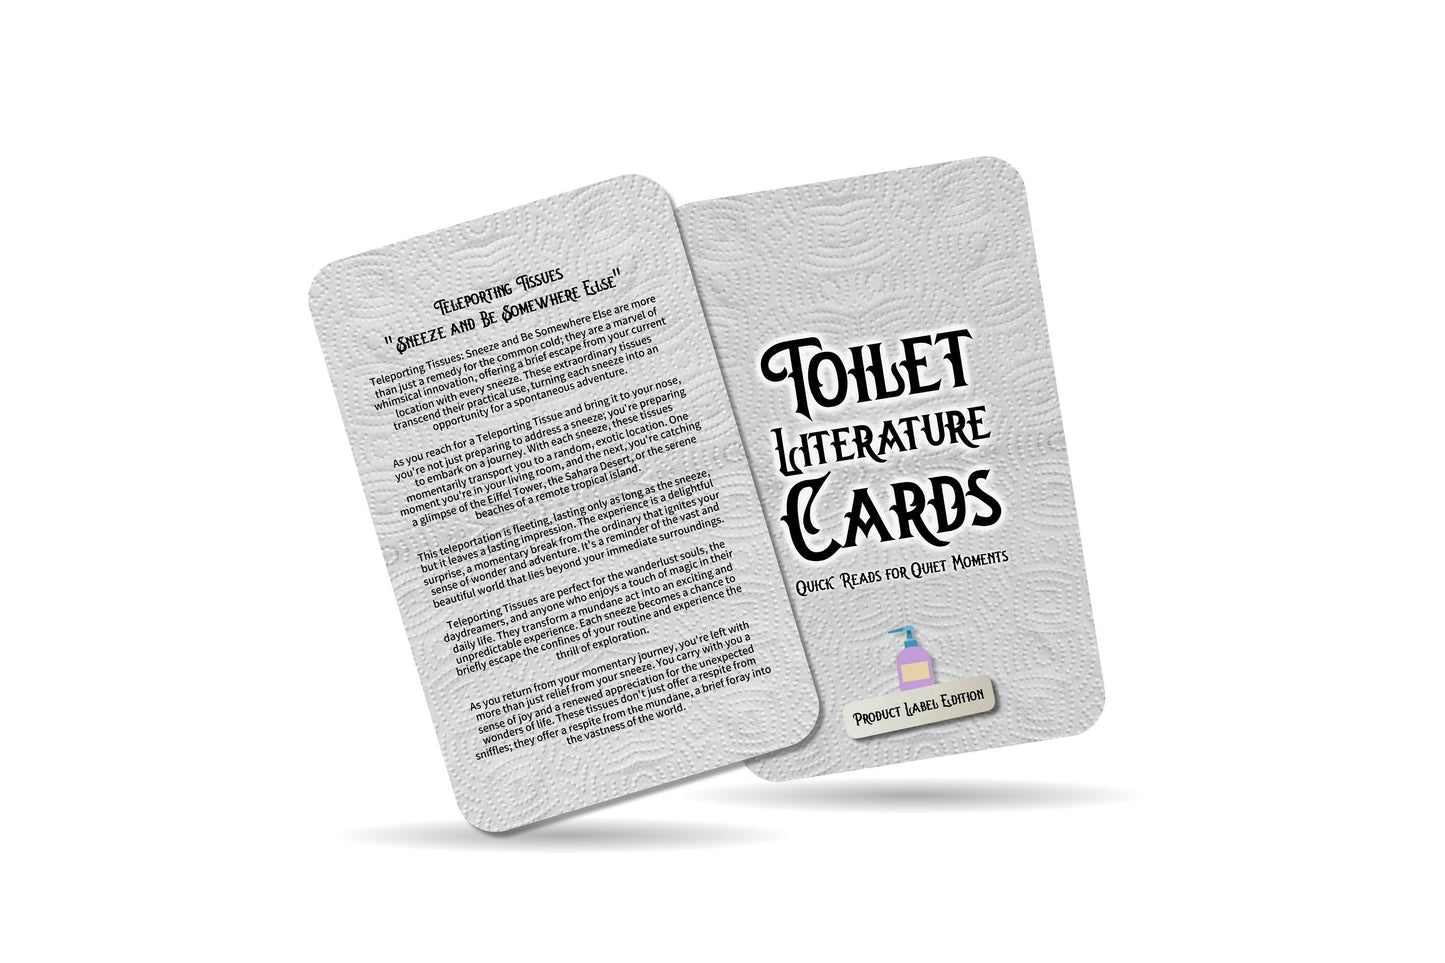 Toilet Literature Cards -  Quick Reads for Quiet Moments - 22 Cards